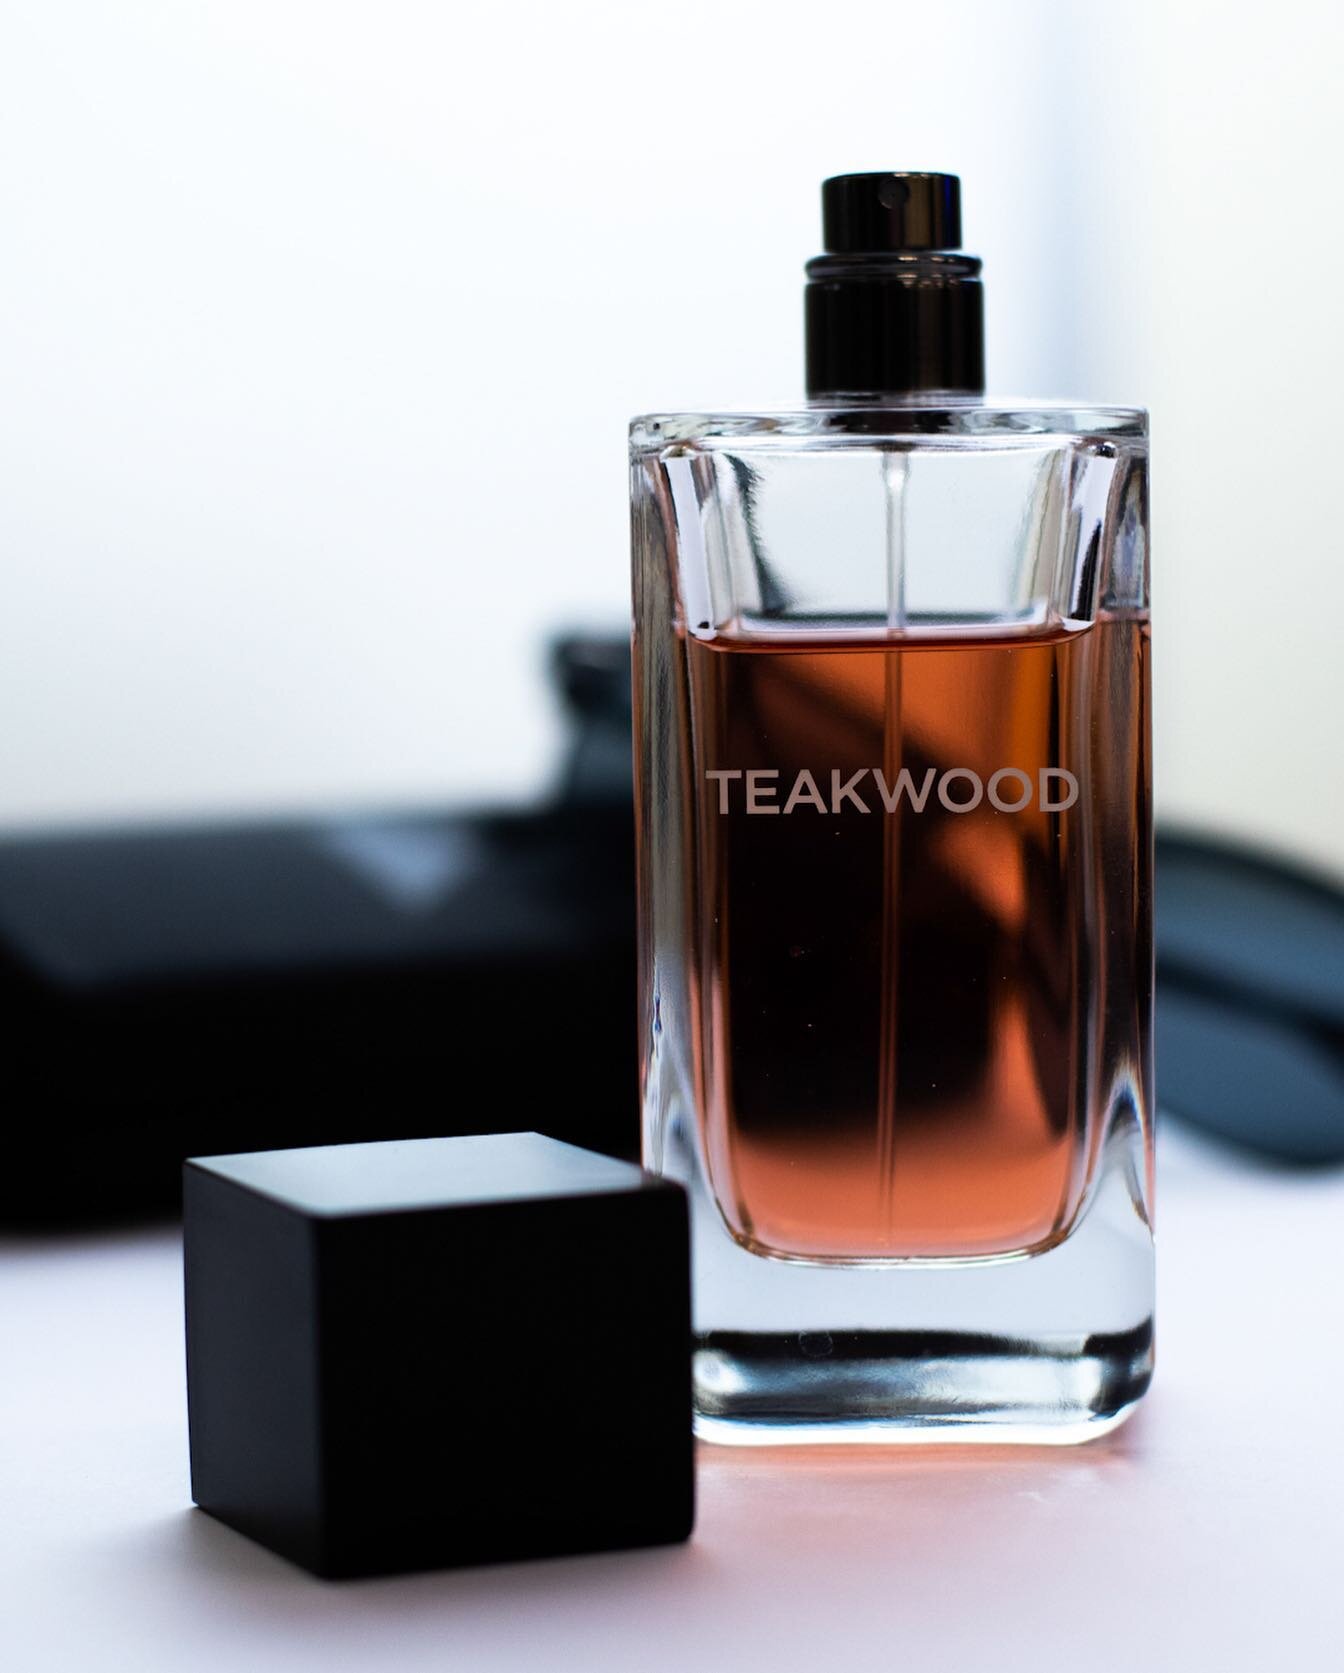 Last week we dove straight into the world of product photography, utilizing some tips and tricks presented by @joshua_ruan and here&rsquo;s a photo from one of our very own members @loading_nick who got this crazy professional shot of some cologne. T